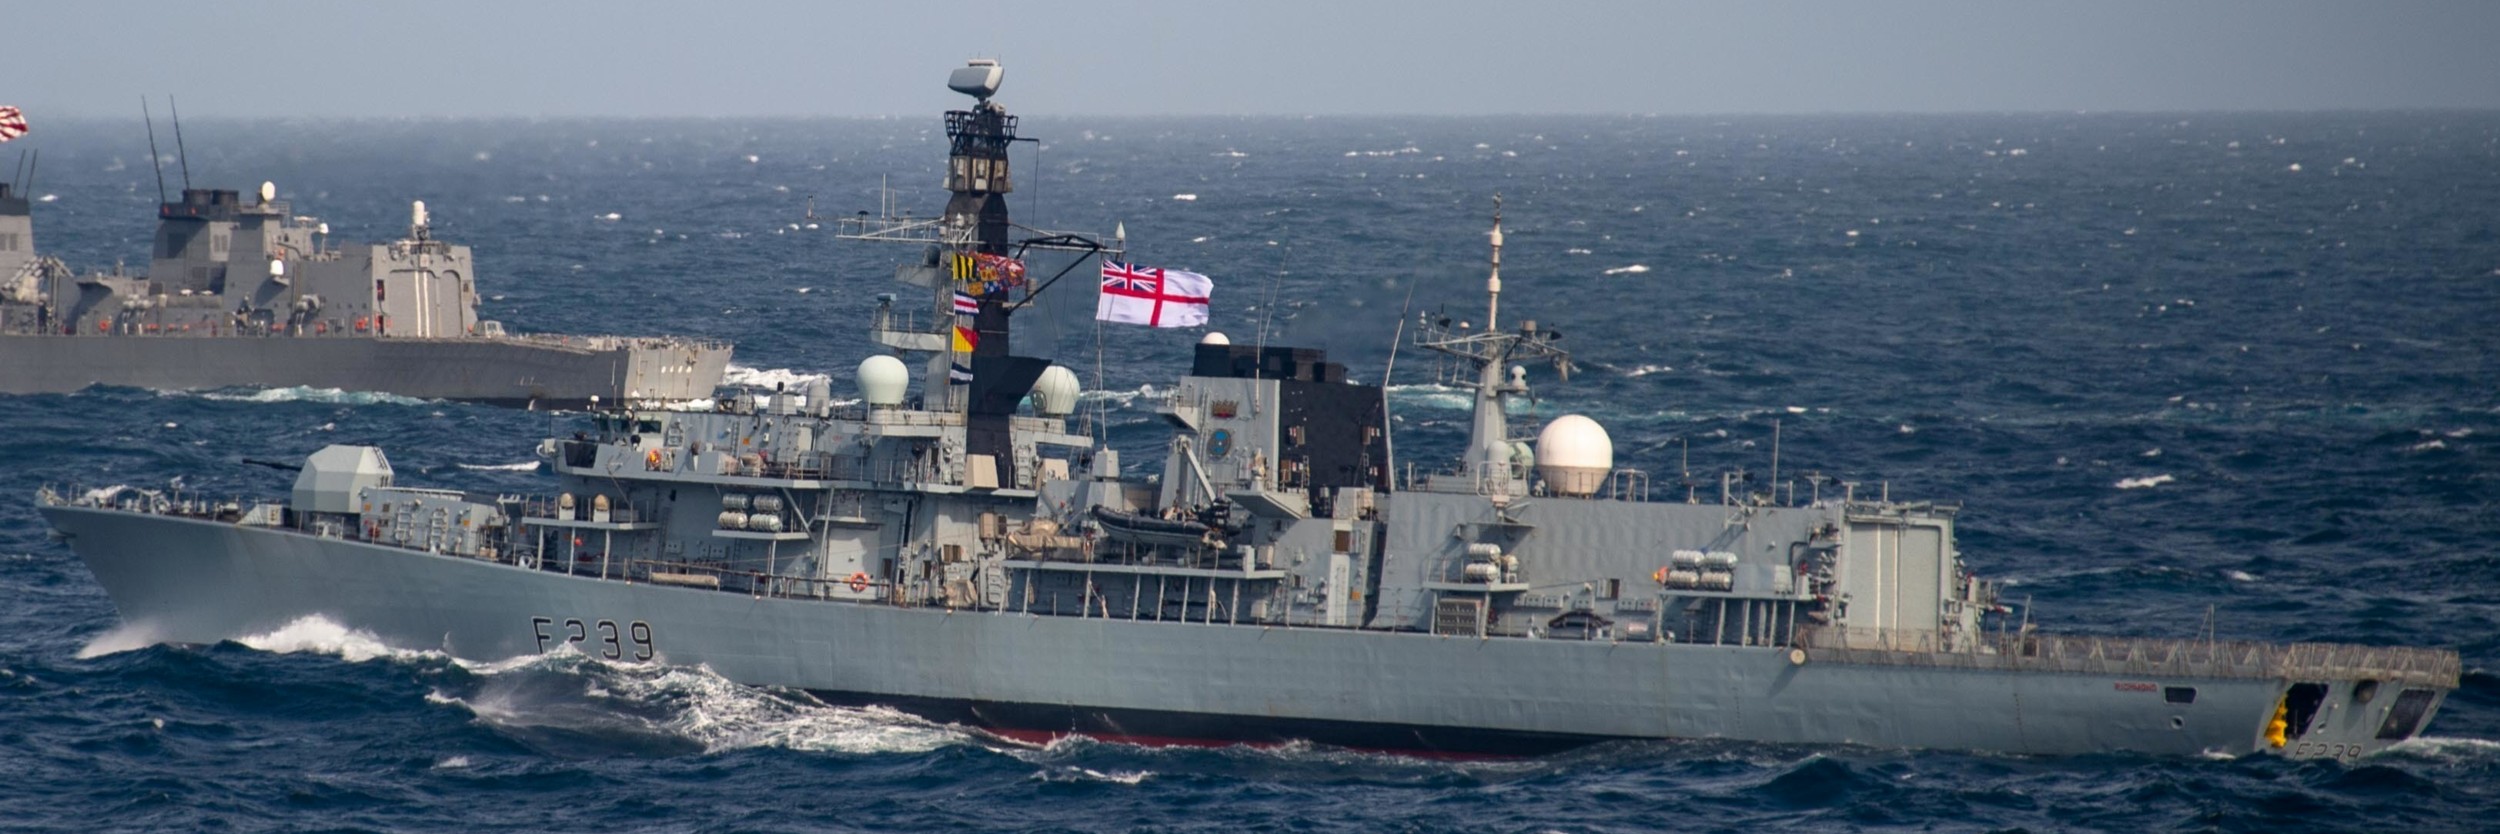 f-239 hms richmond type 23 duke class guided missile frigate ffg royal navy 44